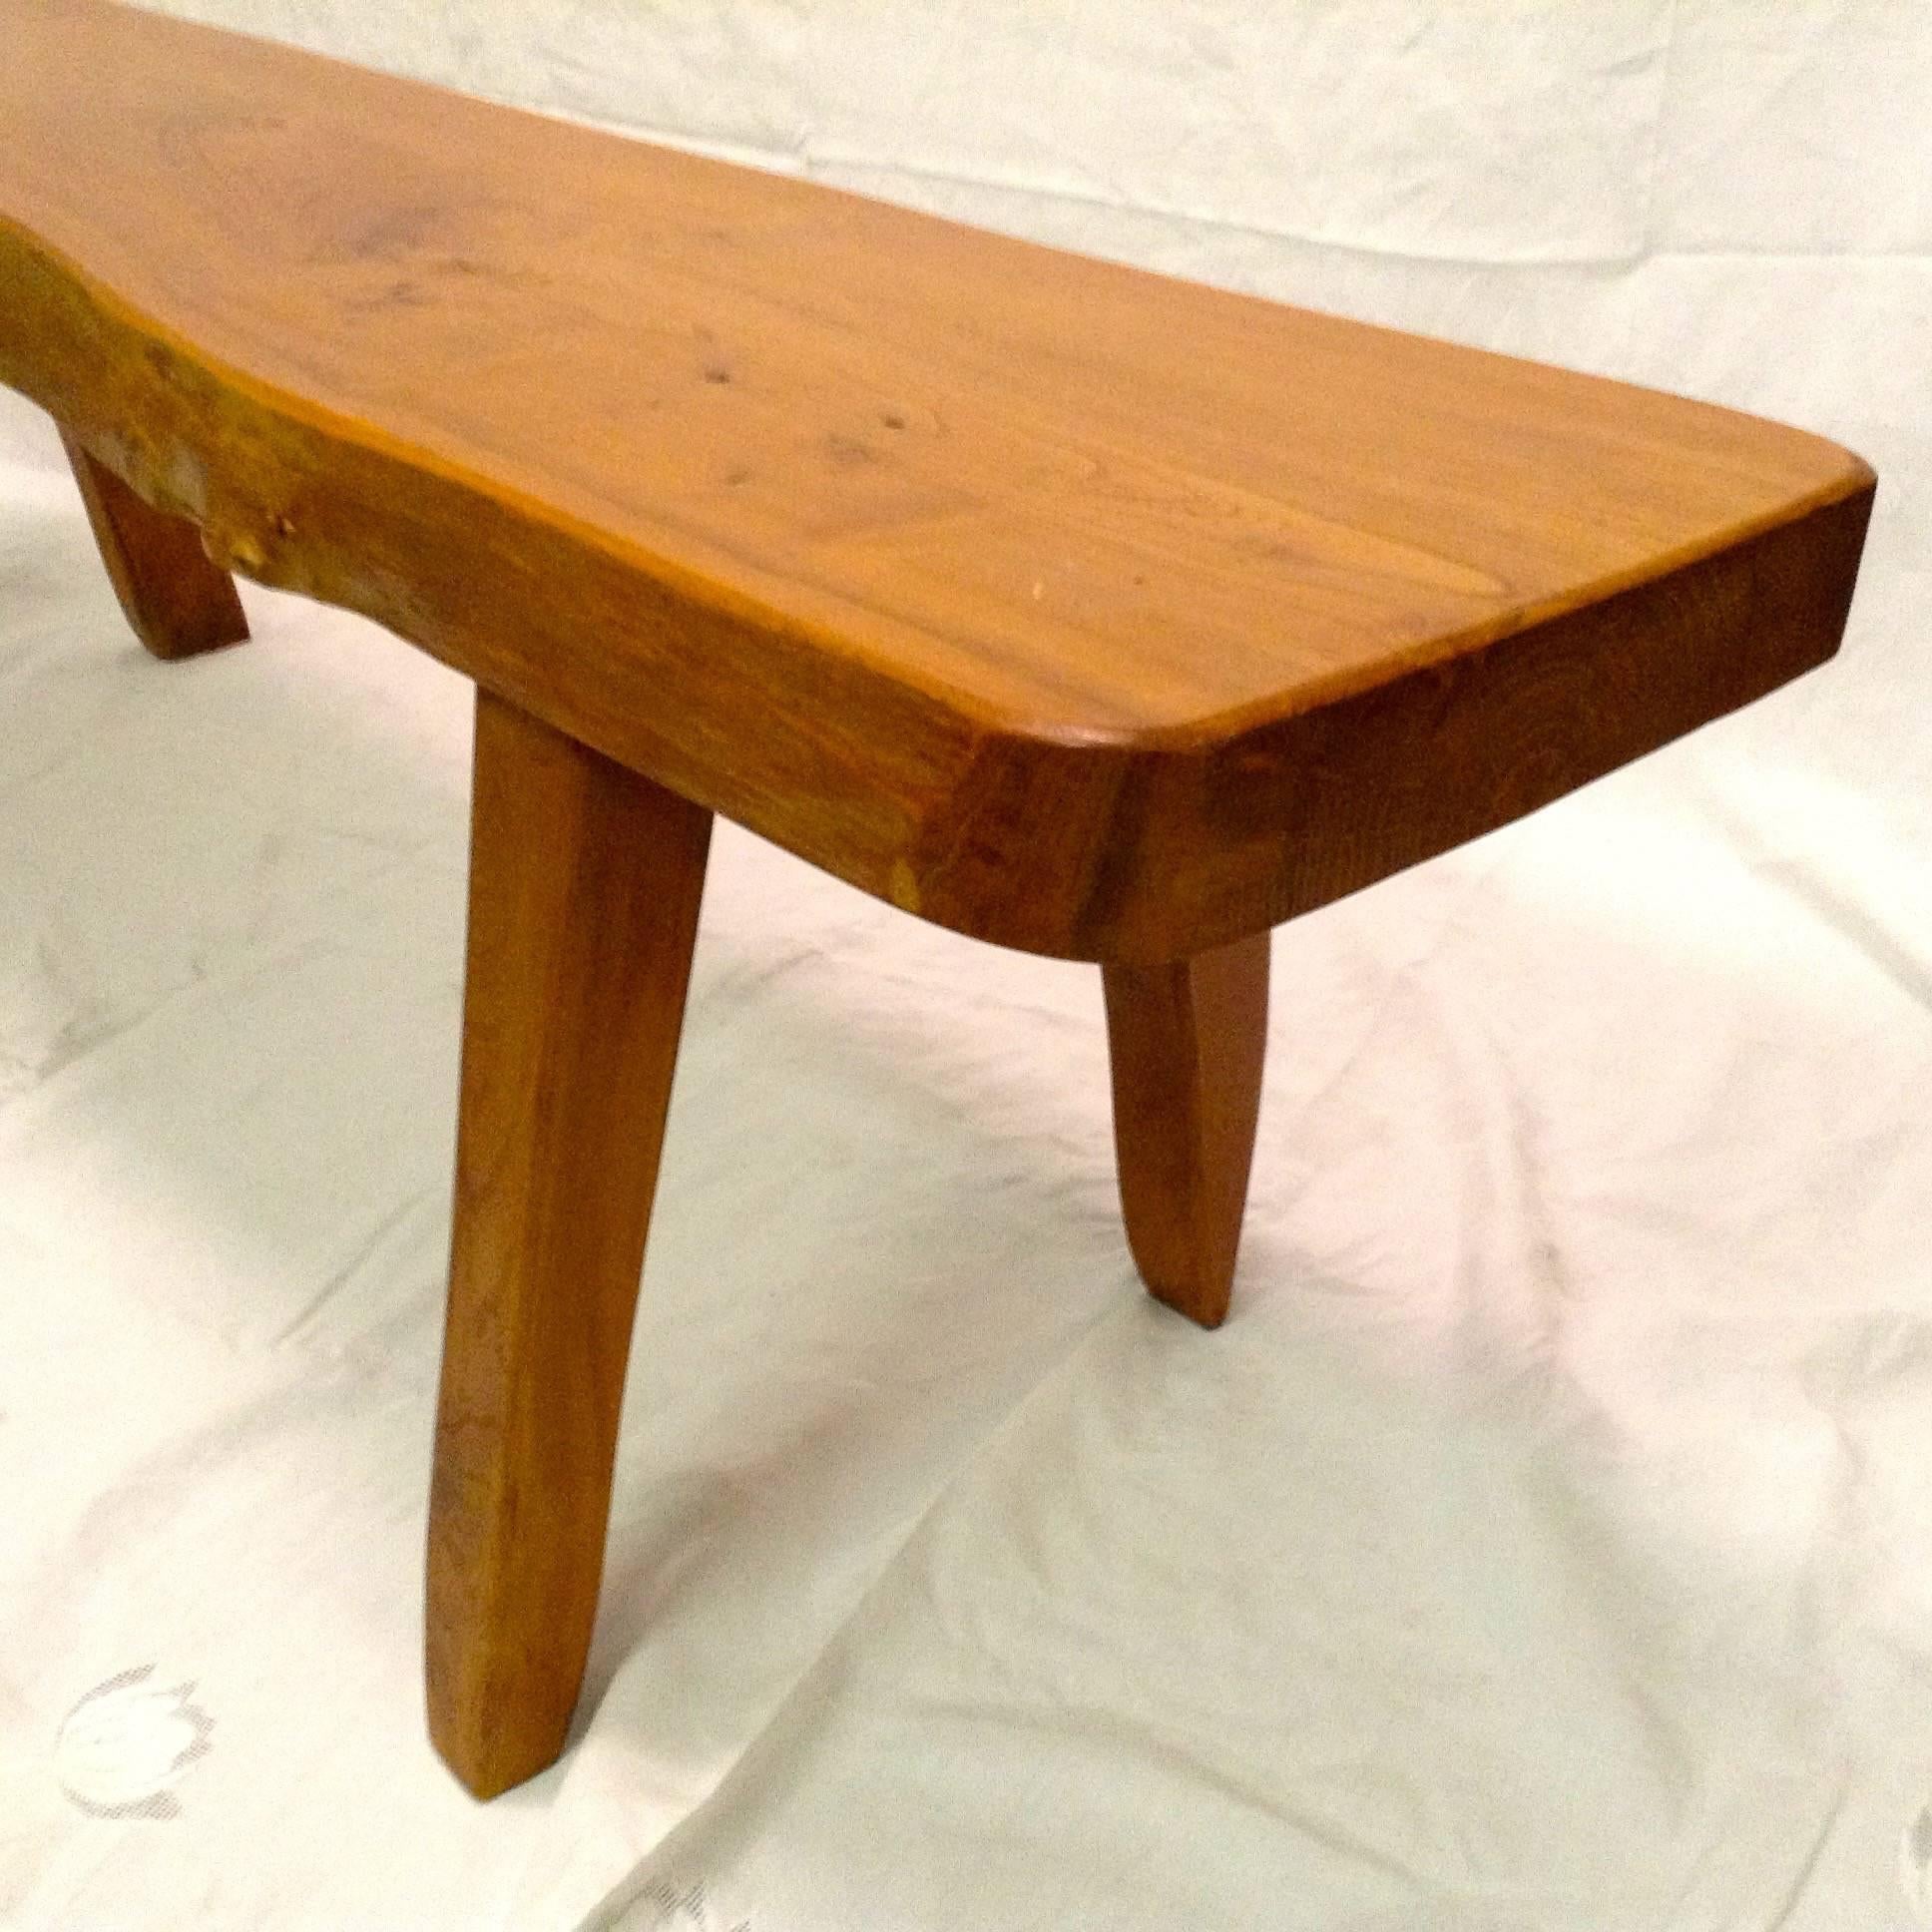 Finnish Wood Pair of Benches by Olavi Hänninen, First Edition, 1958 For Sale 1